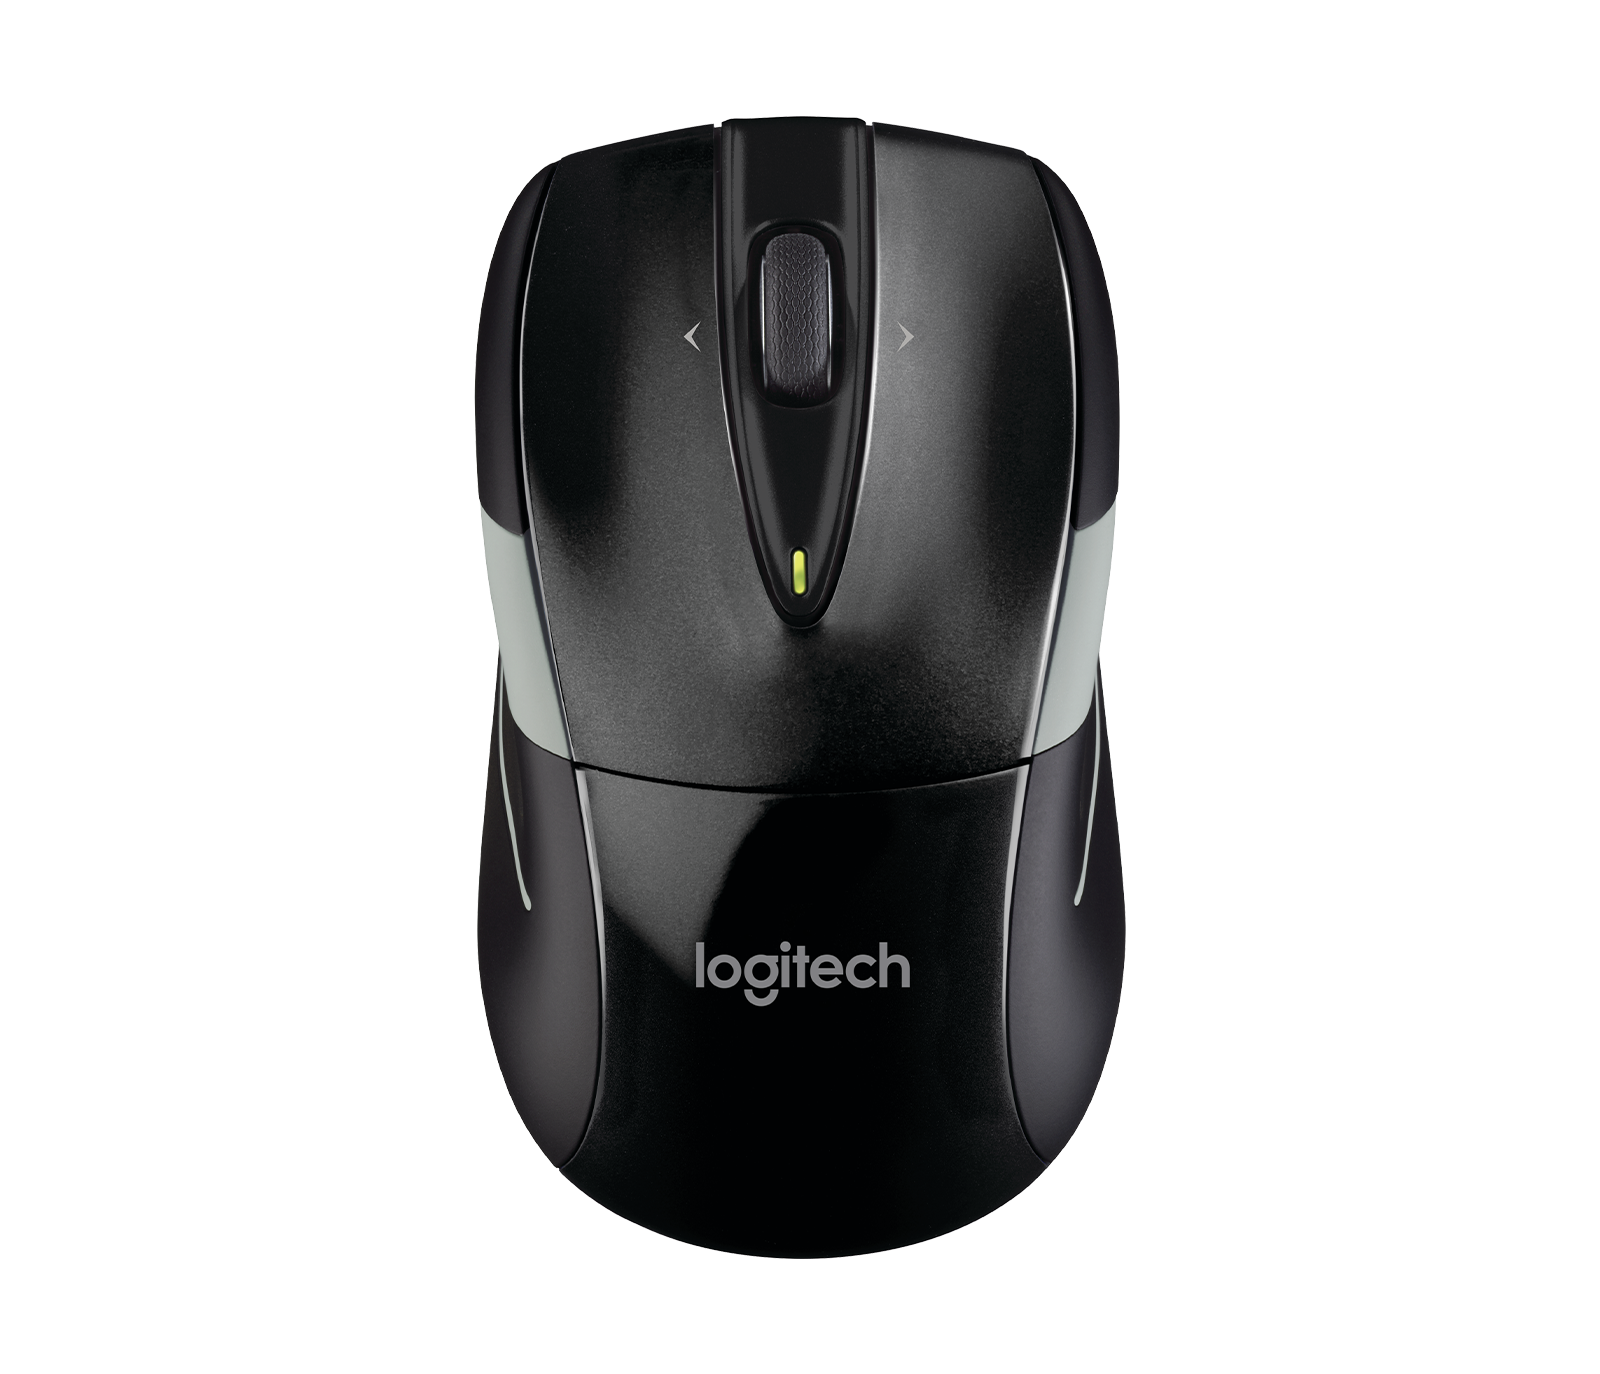 essay Papua New Guinea in the middle of nowhere Logitech M525 Wireless Mouse with Precision Scrolling